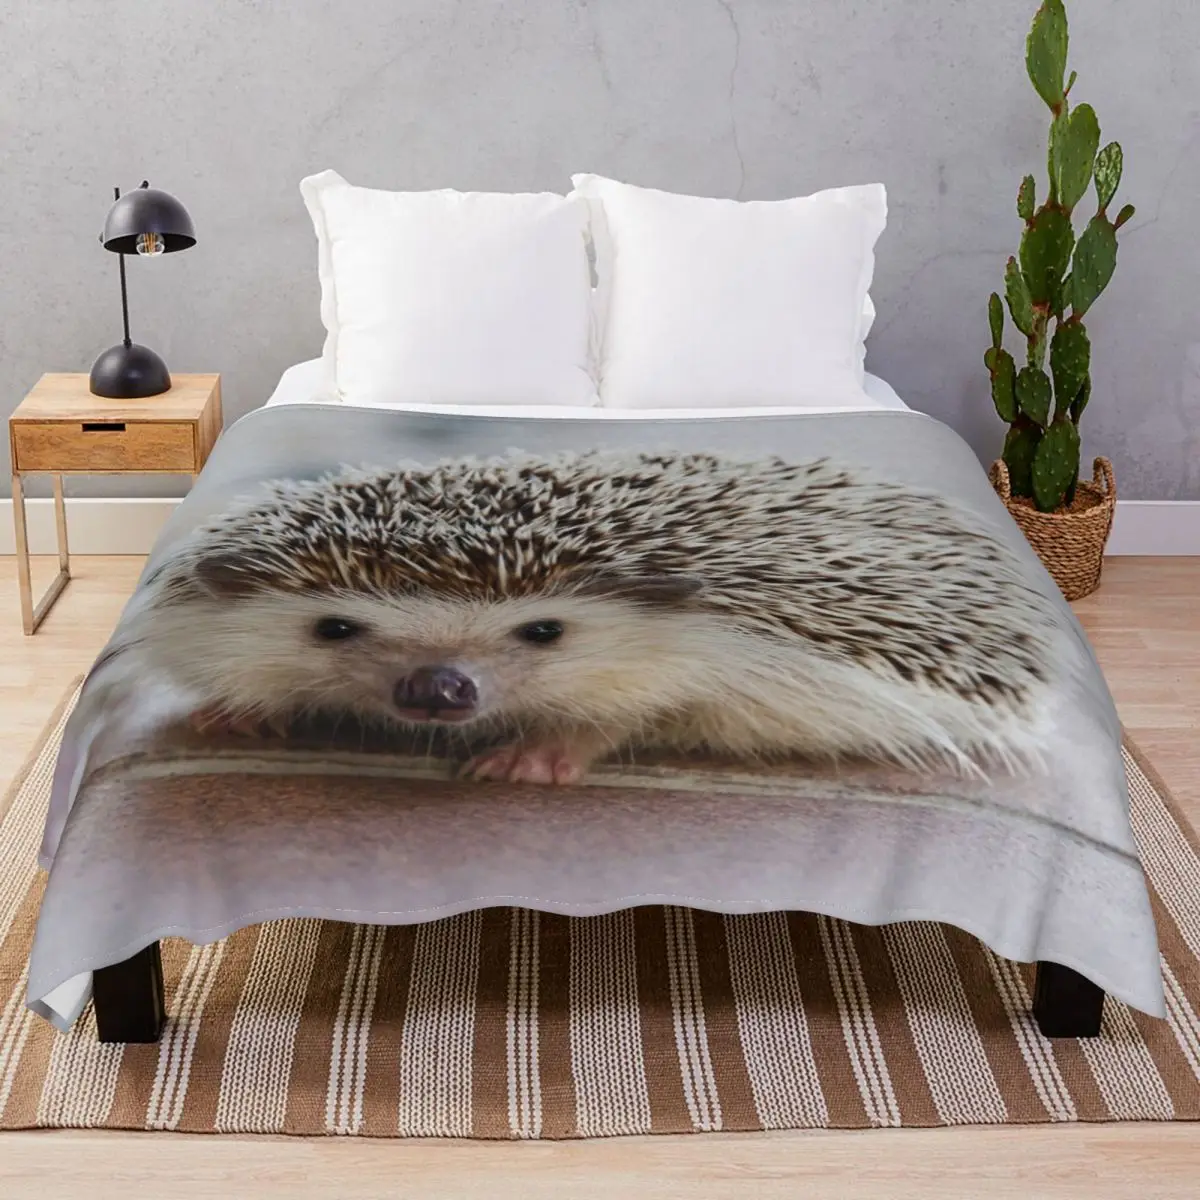 Hedgehog Blanket Flannel Spring/Autumn Ultra-Soft Unisex Throw Blankets for Bed Sofa Camp Office